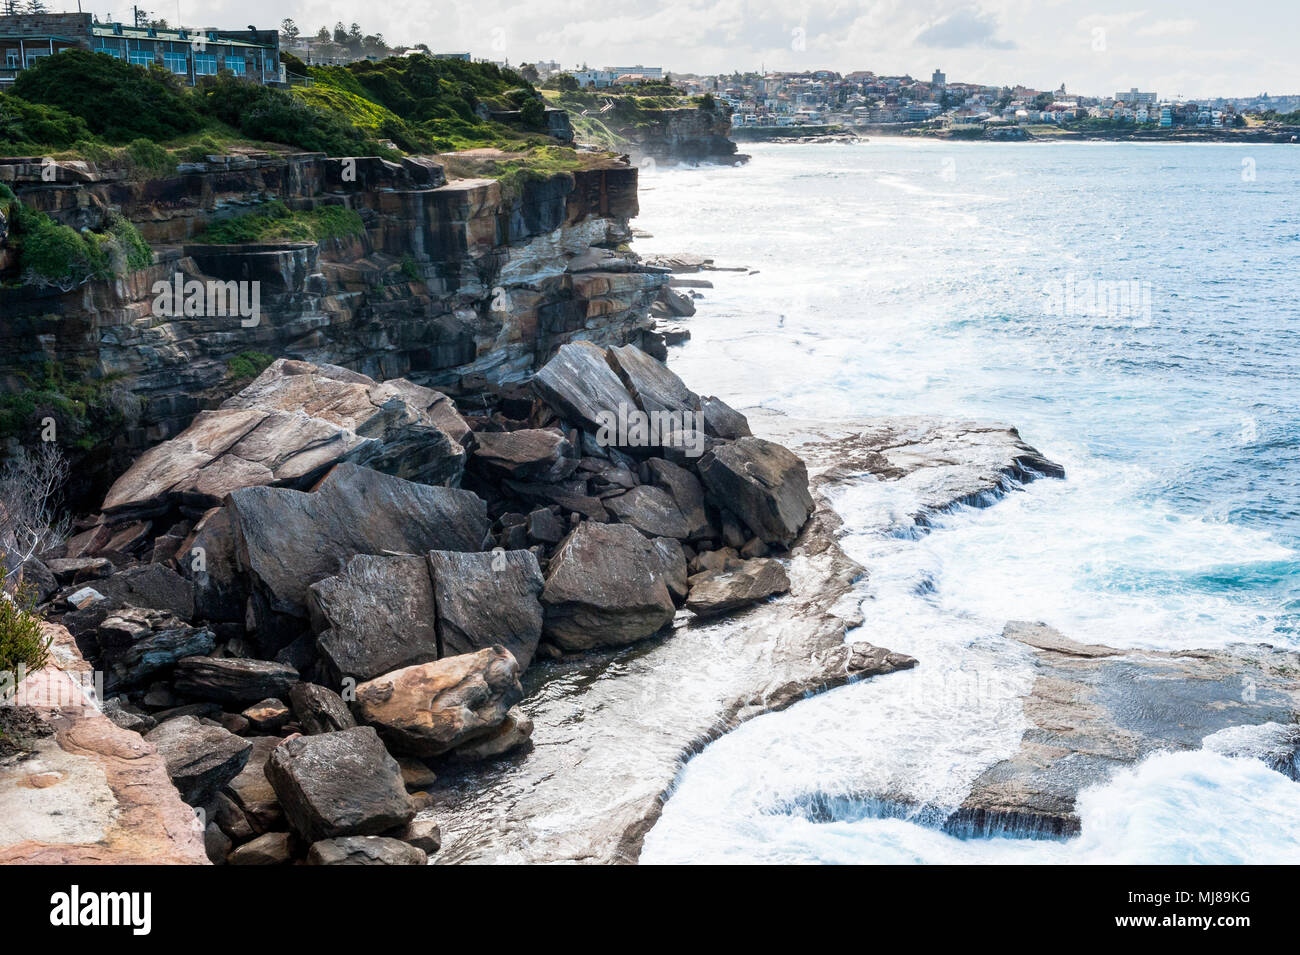 Massive rocks and boulders slip from the cliff into the sea as erosion impacts the shoreline of the famous Coogee Beach walk towards Bondi, Sydney. Stock Photo